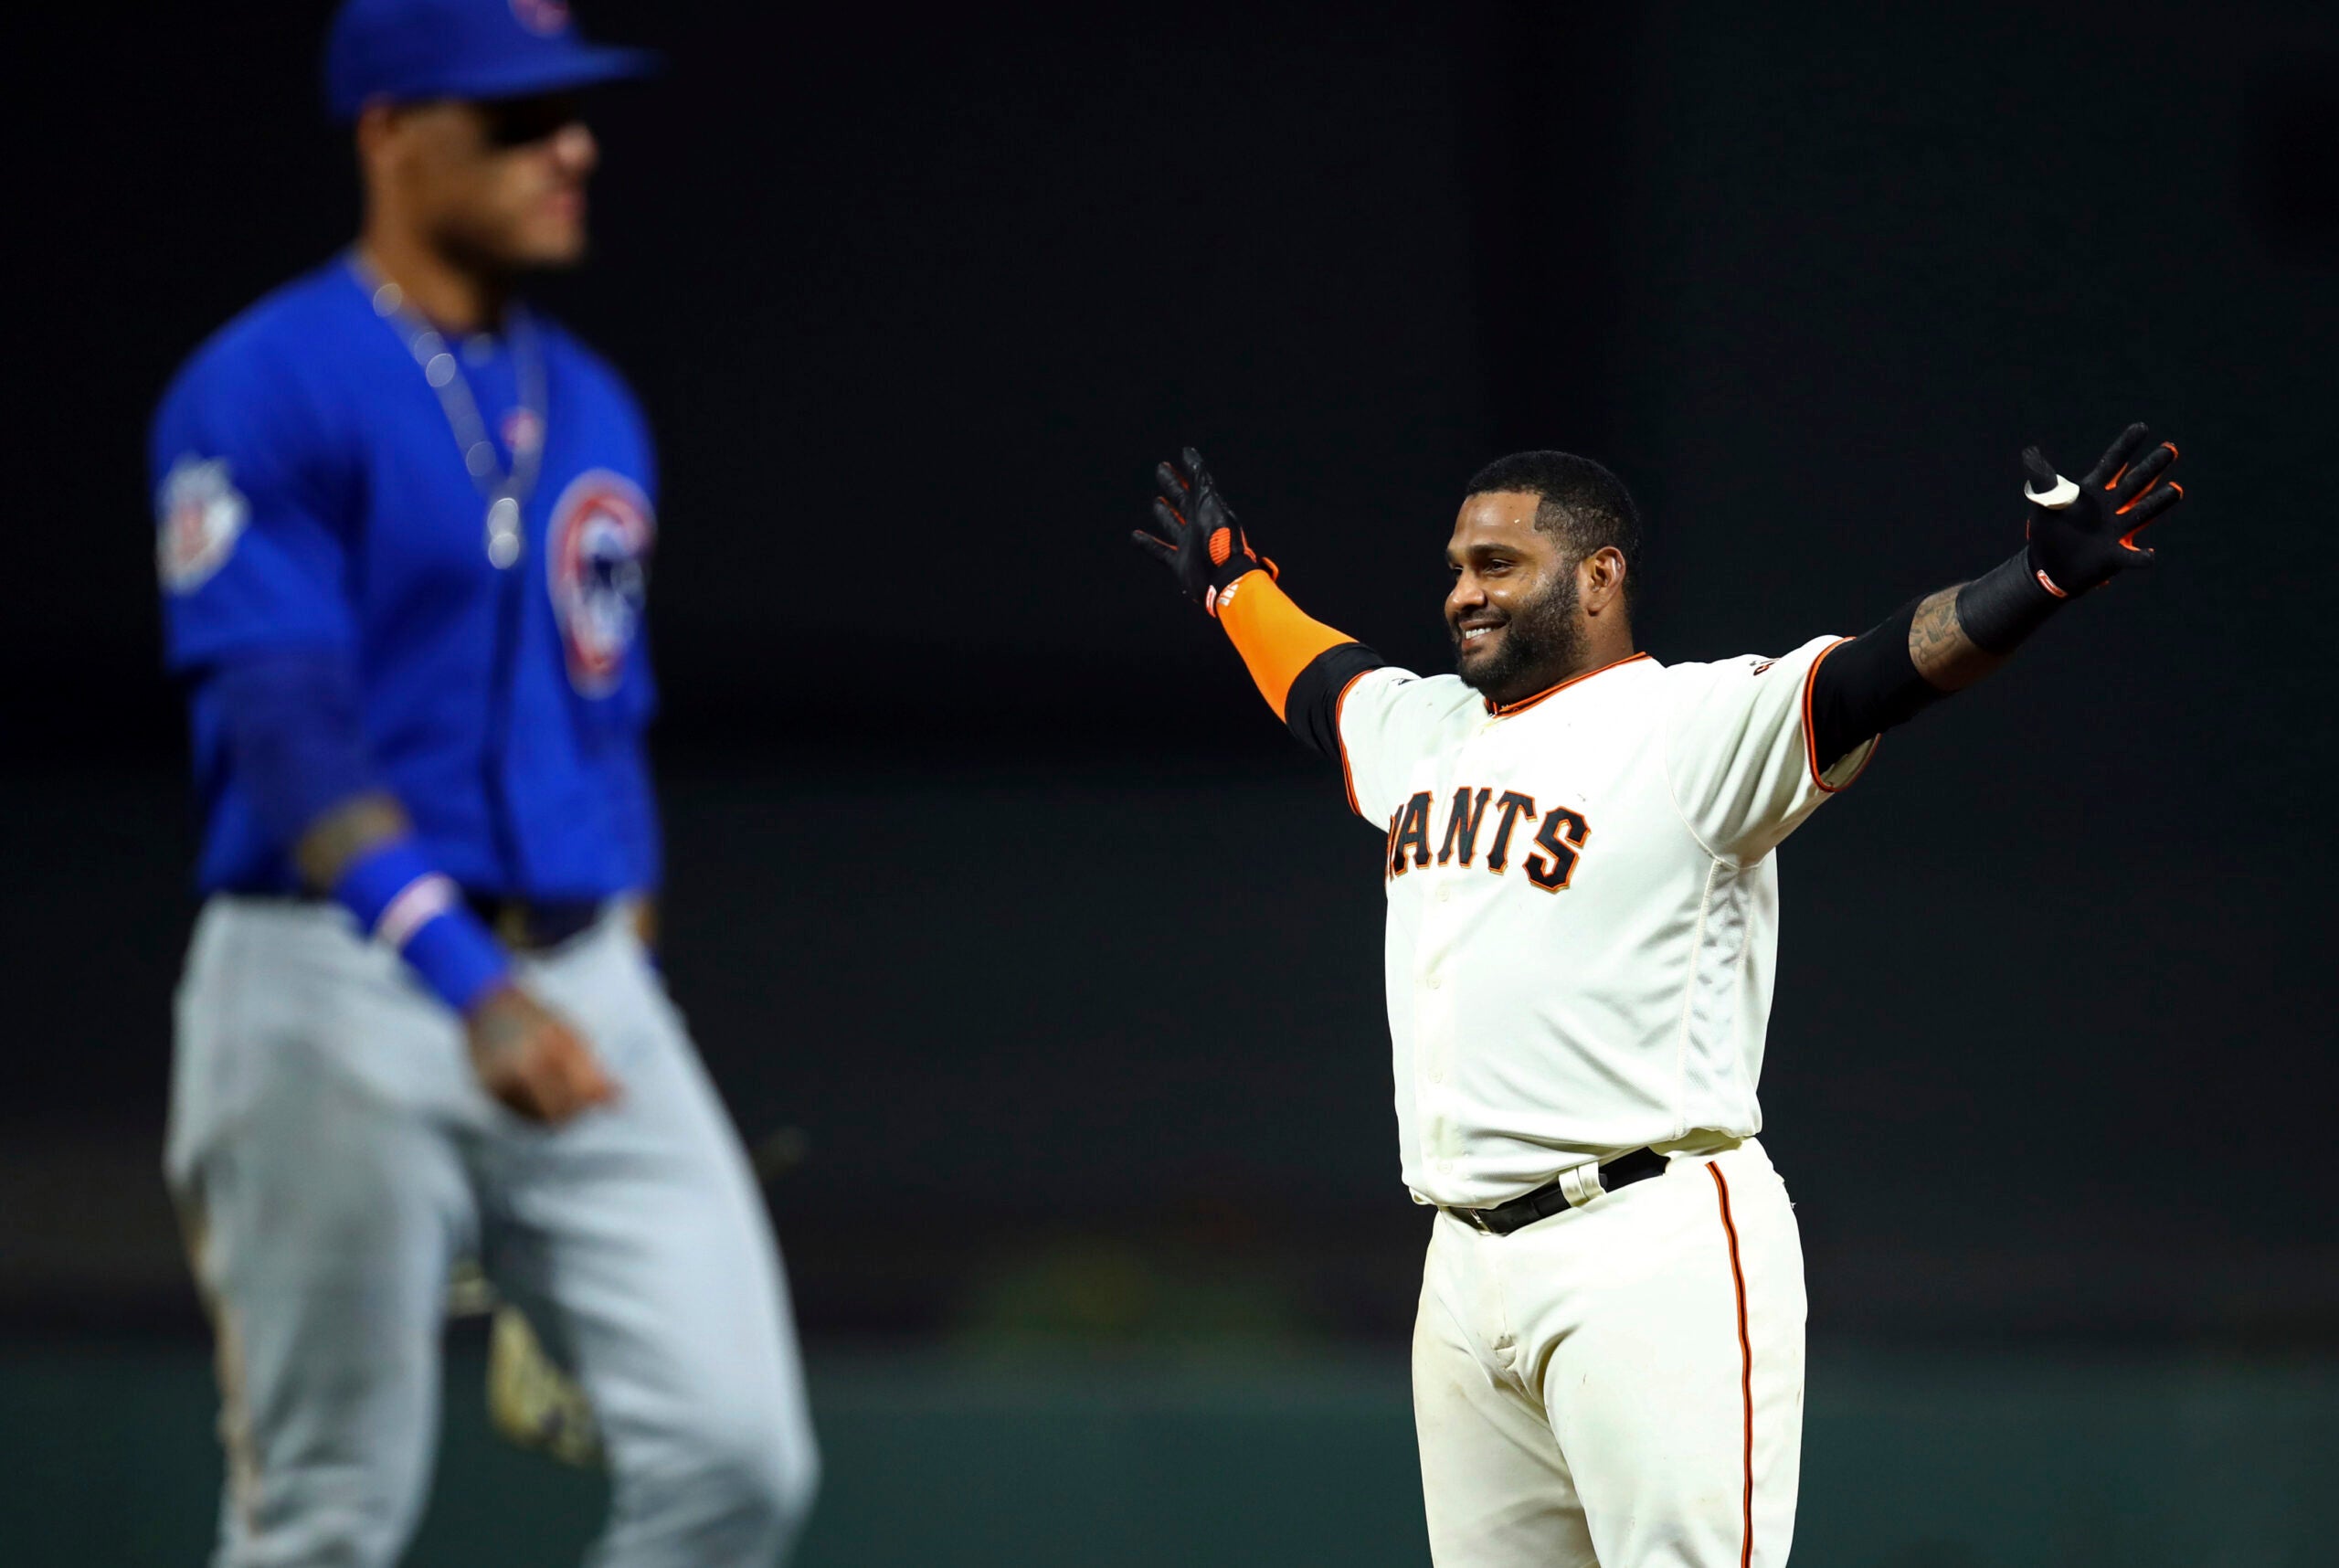 The Giants played Pablo Sandoval at second base against the Cubs